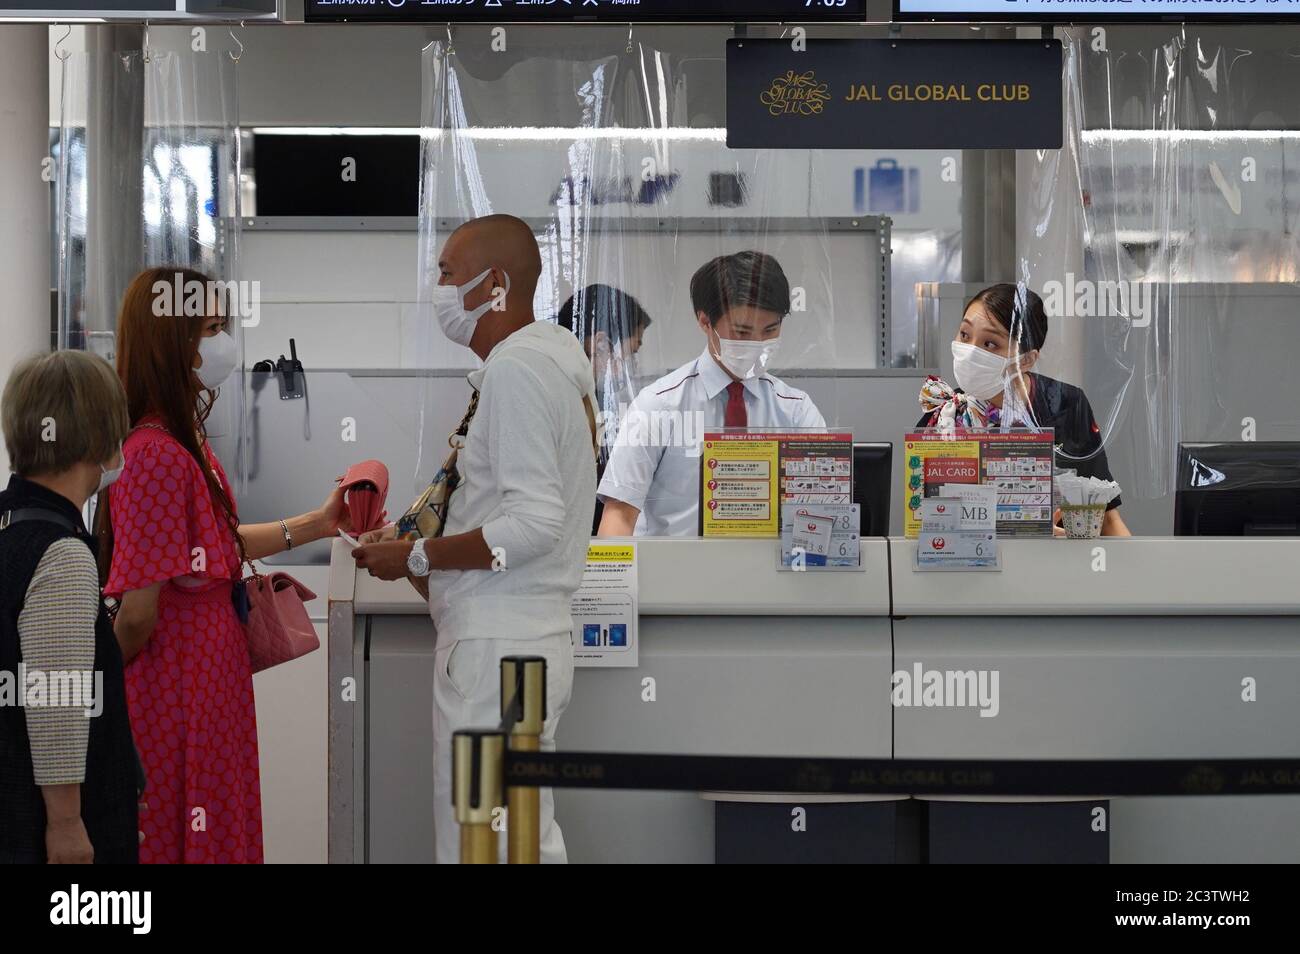 Airline staff attend to passengers while wearing face masks as a preventive measure at the Chubu Centrair International Airport.Japan's government lifted all COVID-19 related restrictions on domestic travels on June 19 while most of the international flights remain cancelled. Stock Photo